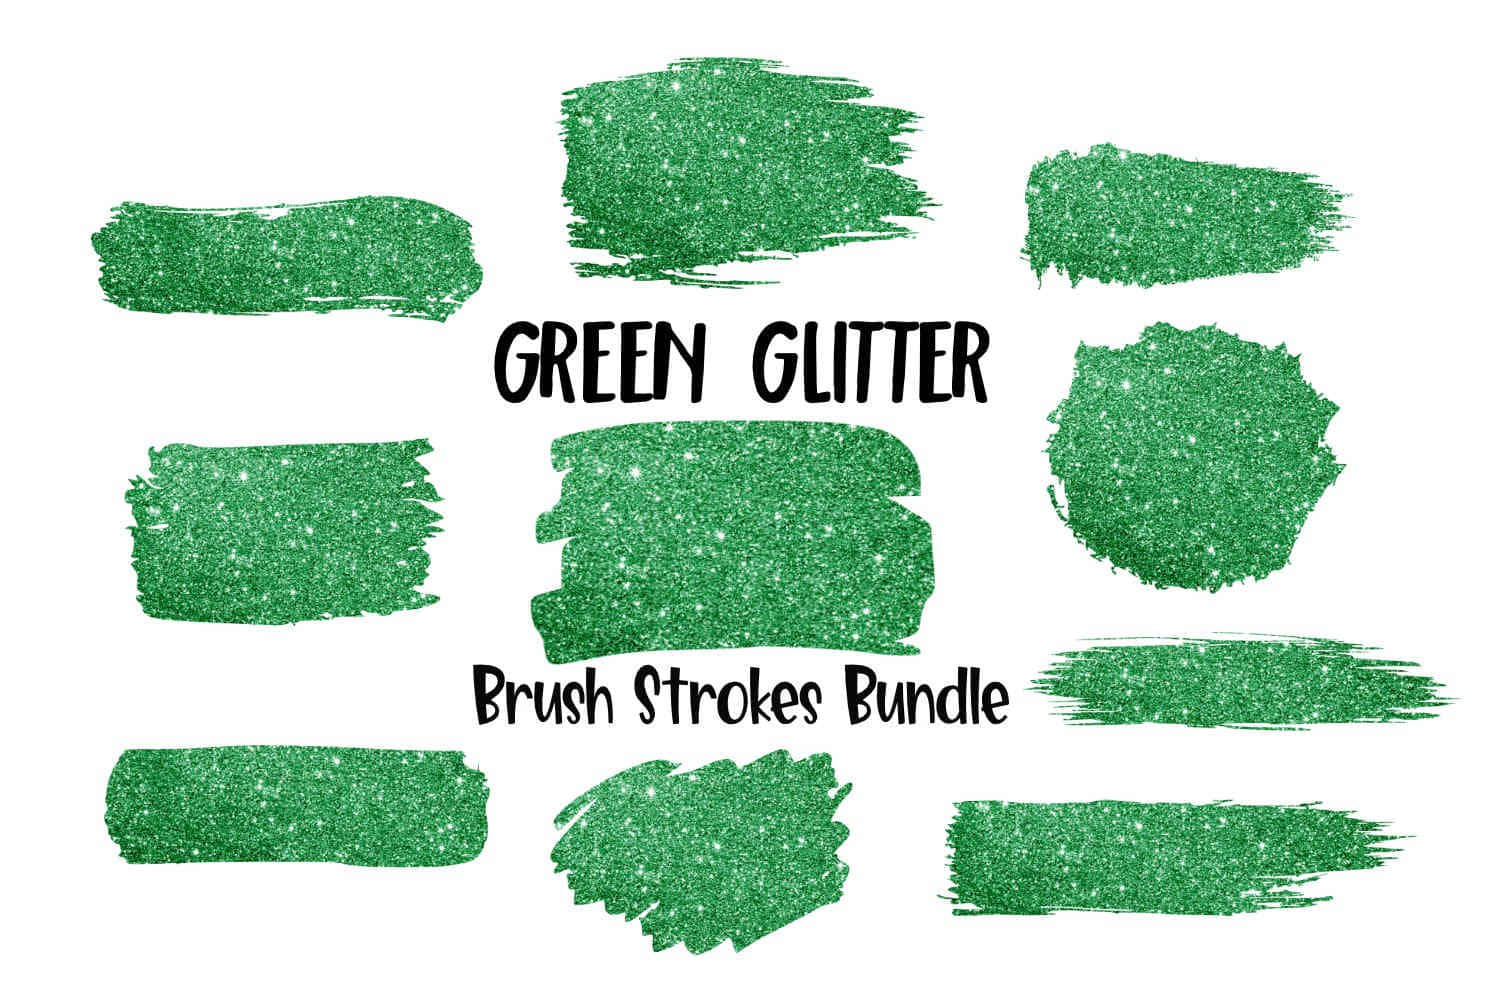 Strokes Of Green Glitter Background Infographic